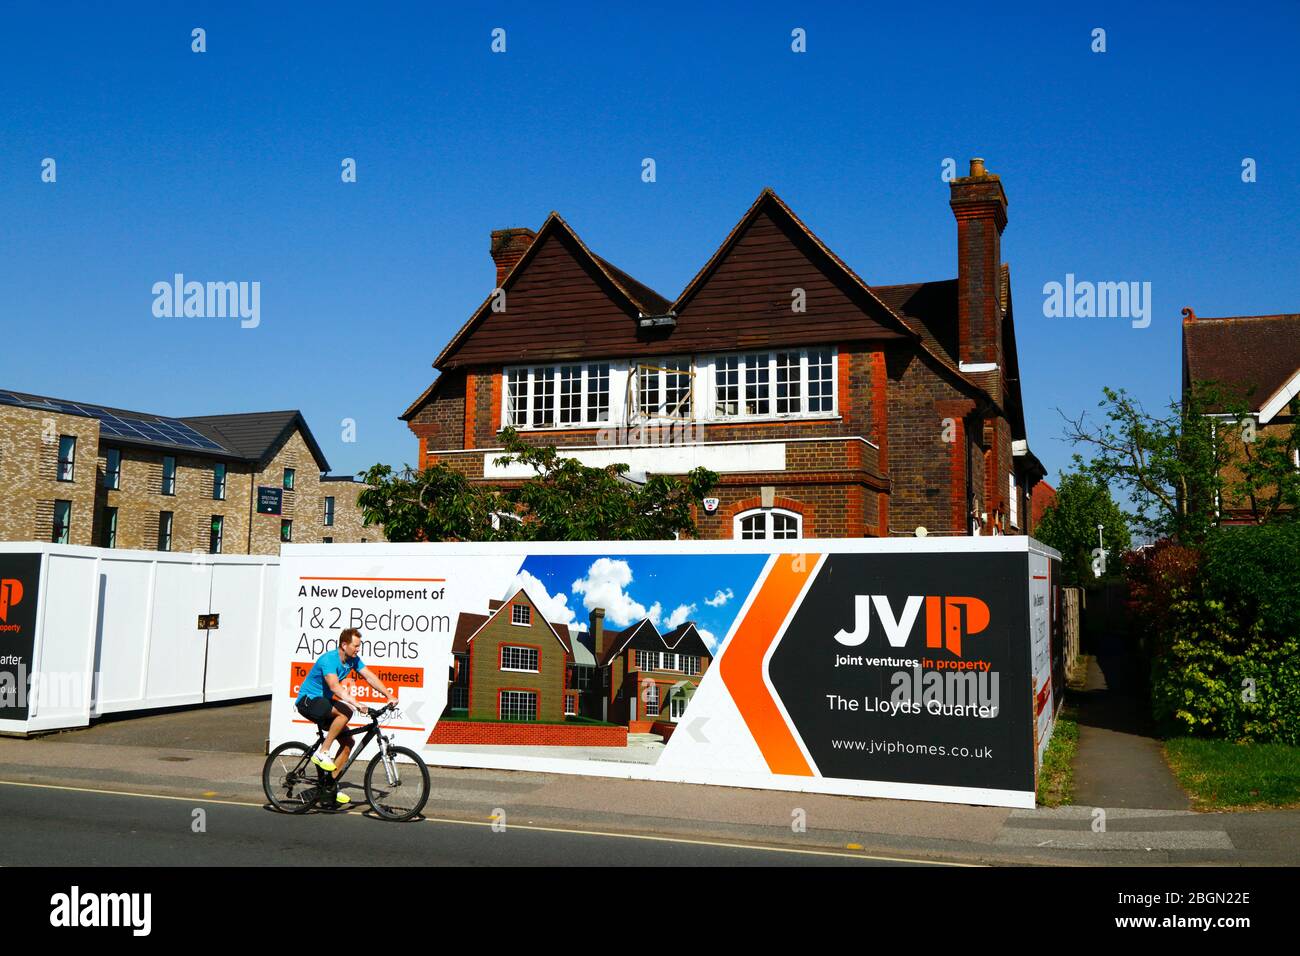 JVIP property developer signs outside project to convert the former Lloyds Bank building into flats, London Road, Southborough, Kent, England Stock Photo